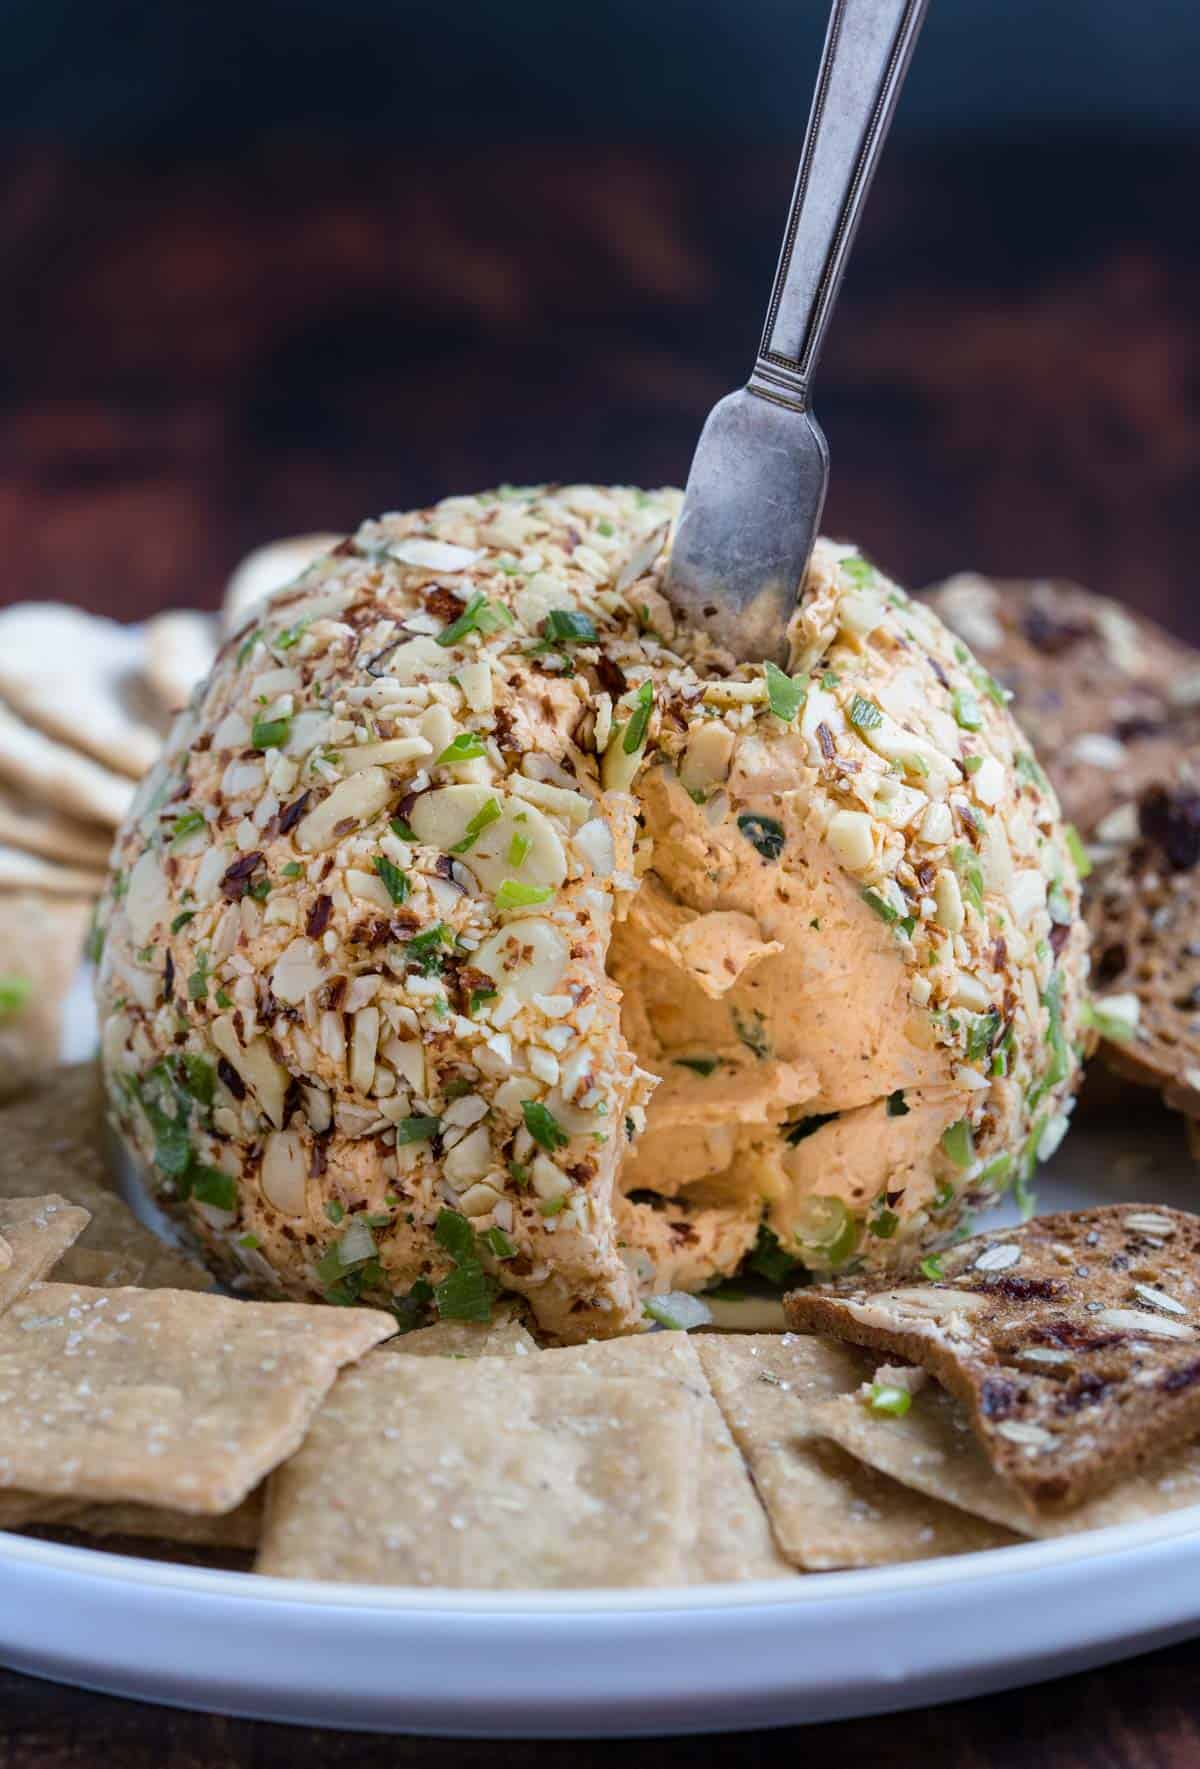 Cheeseball coated with almonds on a platter